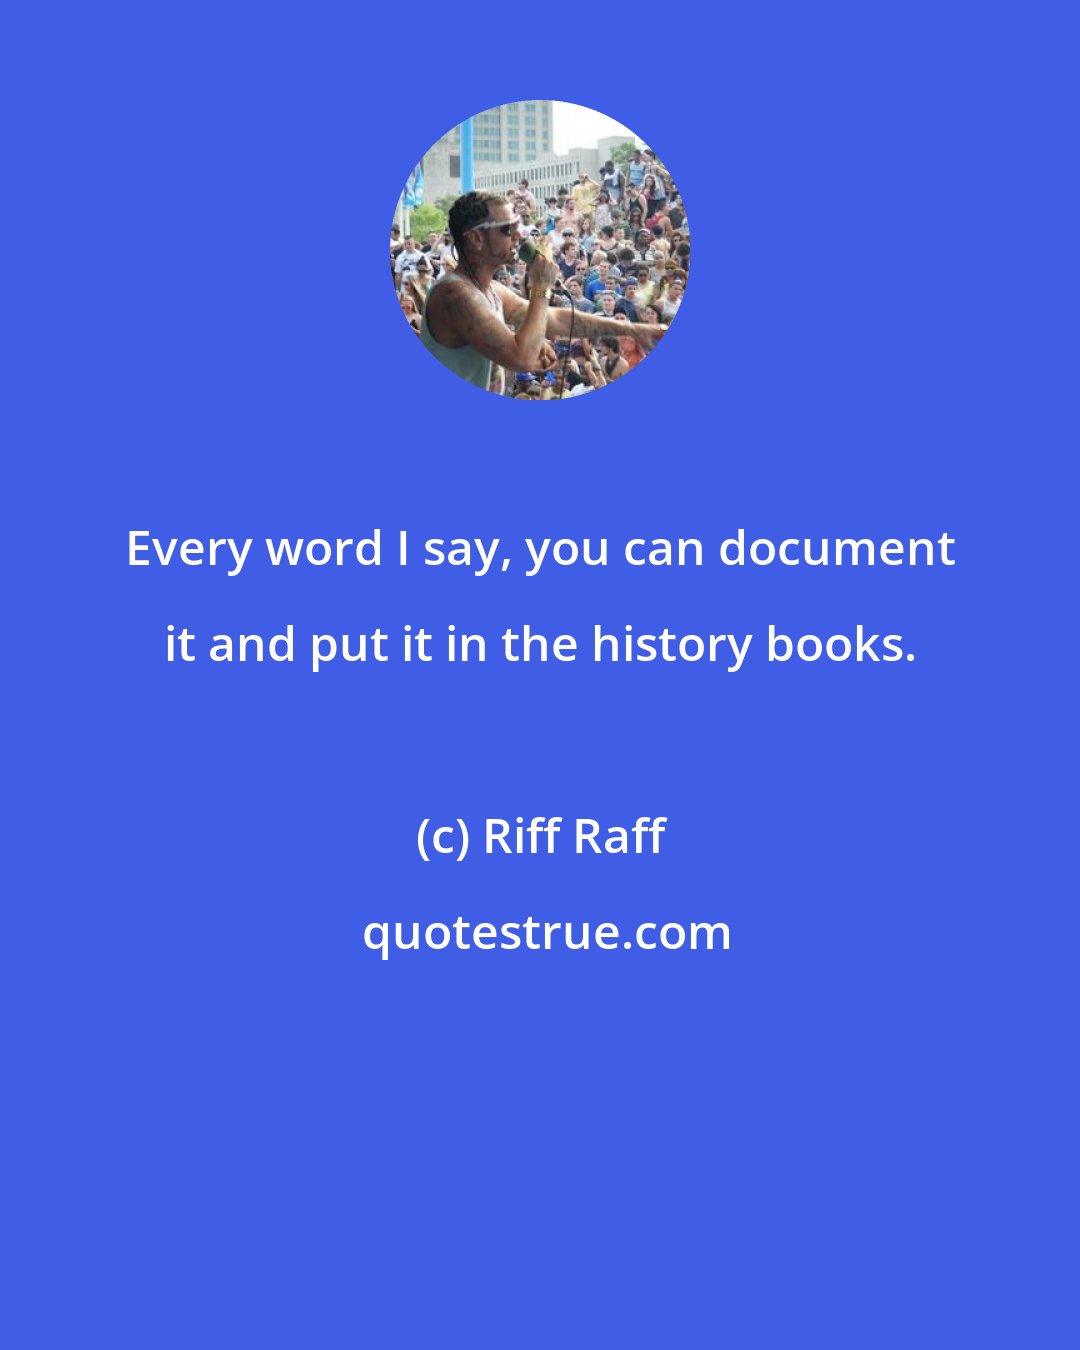 Riff Raff: Every word I say, you can document it and put it in the history books.